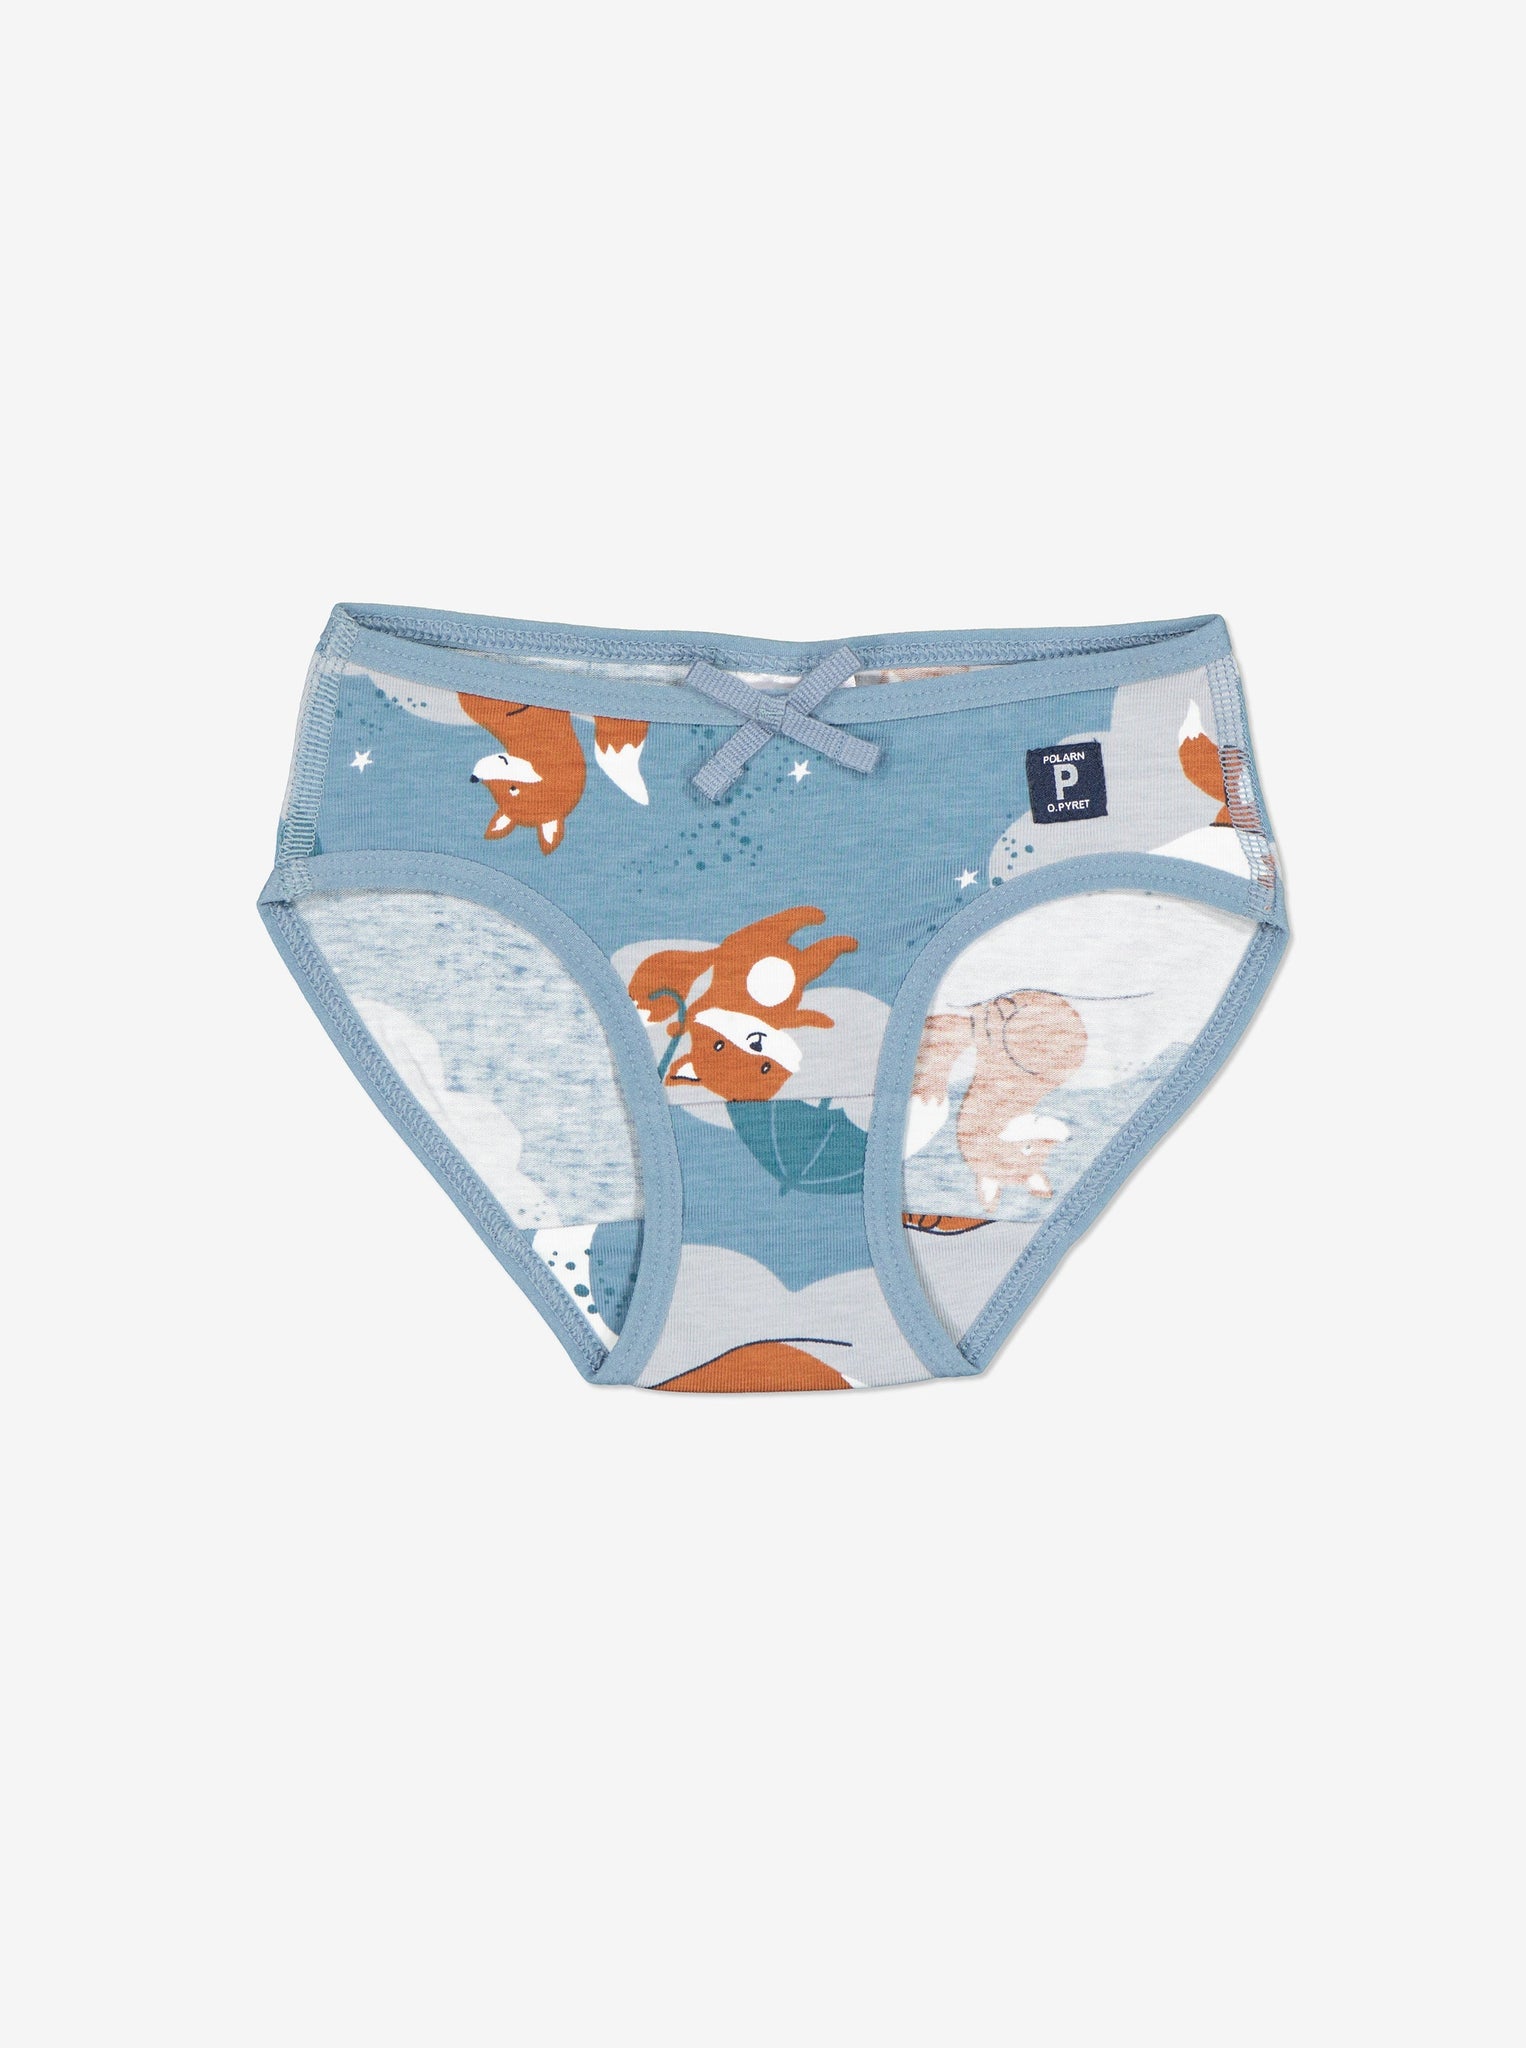 Organic Cotton Blue Girls Briefs from the Polarn O. Pyret kidswear collection. Clothes made using sustainably sourced materials.